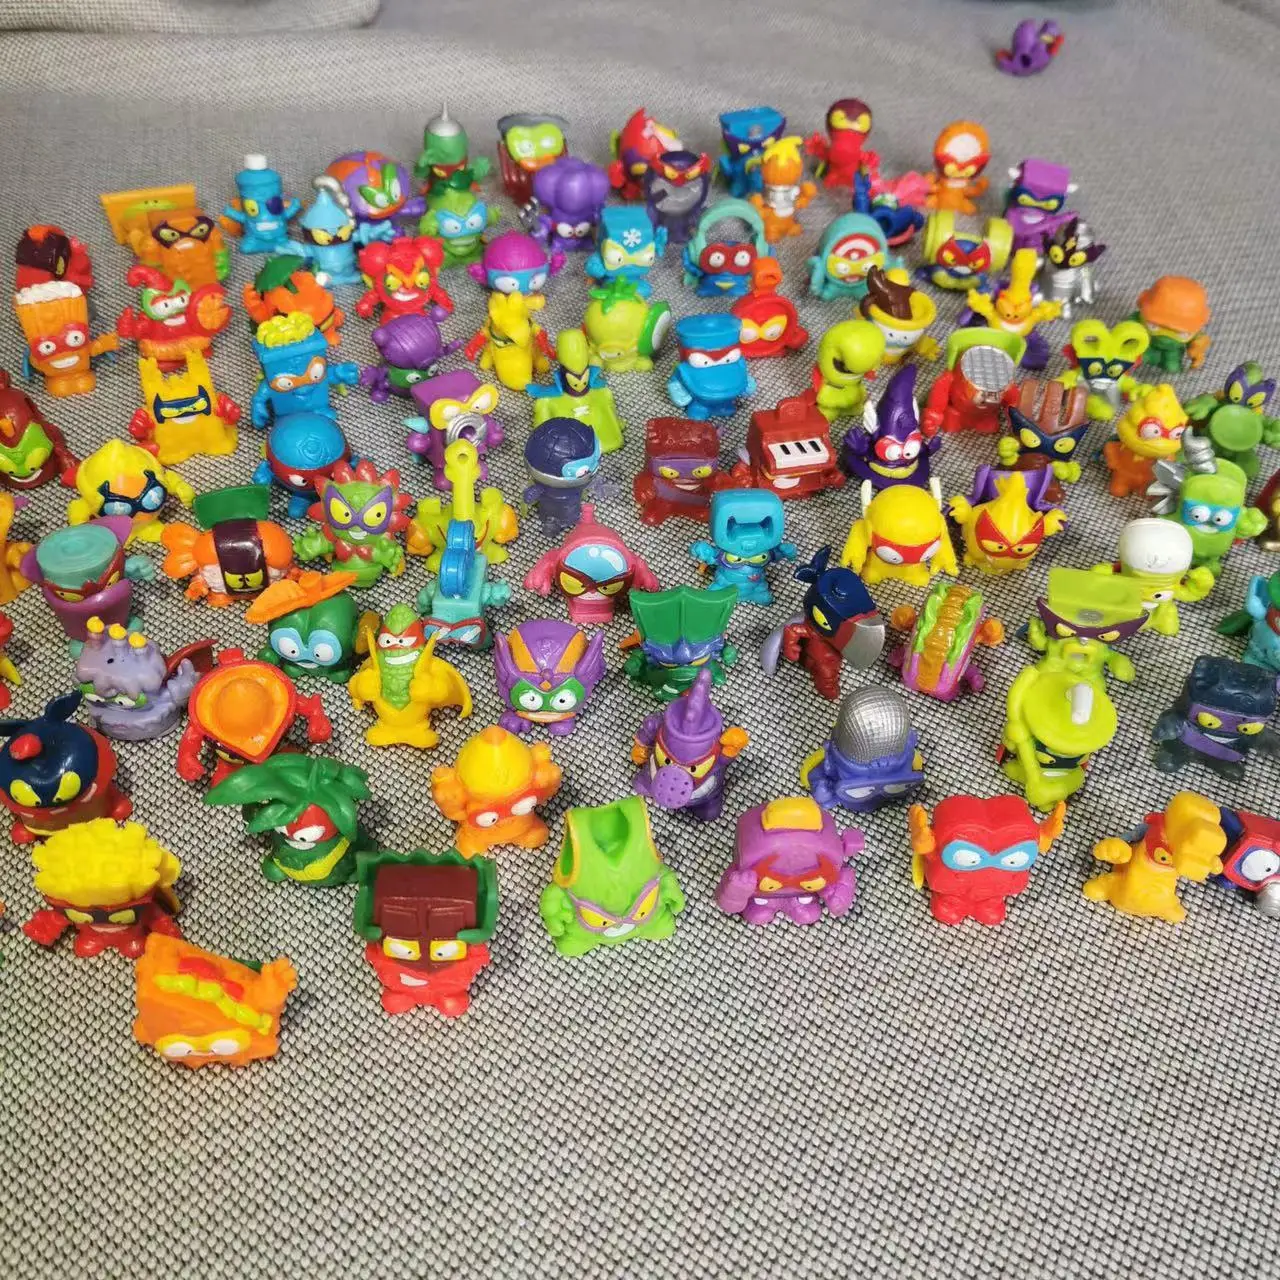 

10-50pcs Original Superzings Superthings Action Figures 3CM Super Zings Garbage Trash Collection Toys Model for Kids Gifts